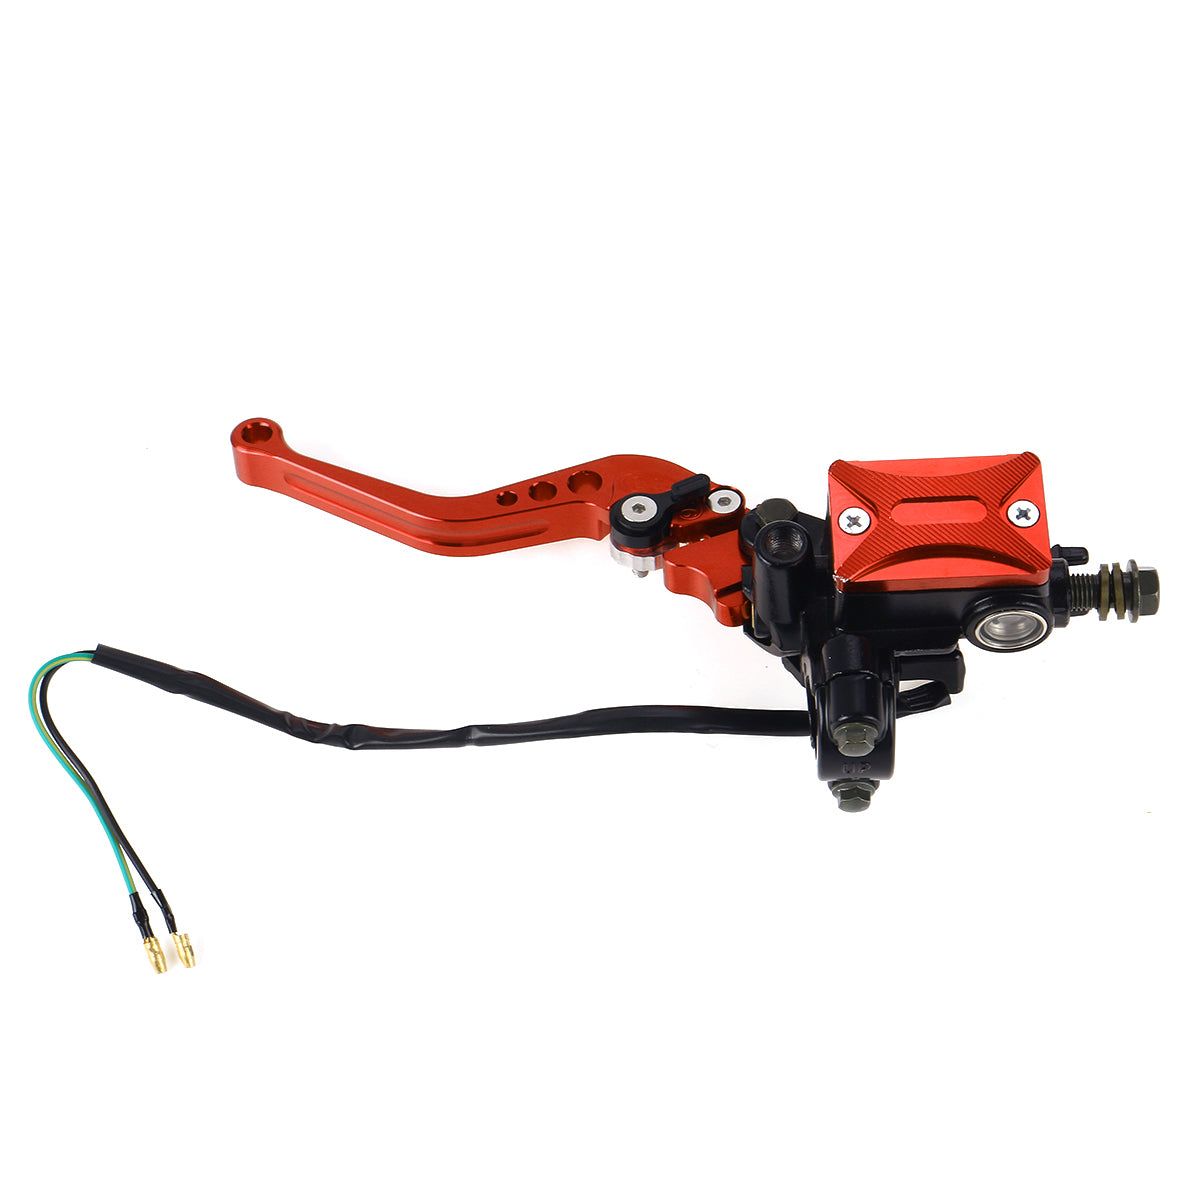 Brown 7/8 Inch 22mm Motorcycle Hydraulic Brake Clutch Master Cylinder Reservoir Lever With Cable Aluminum Universal